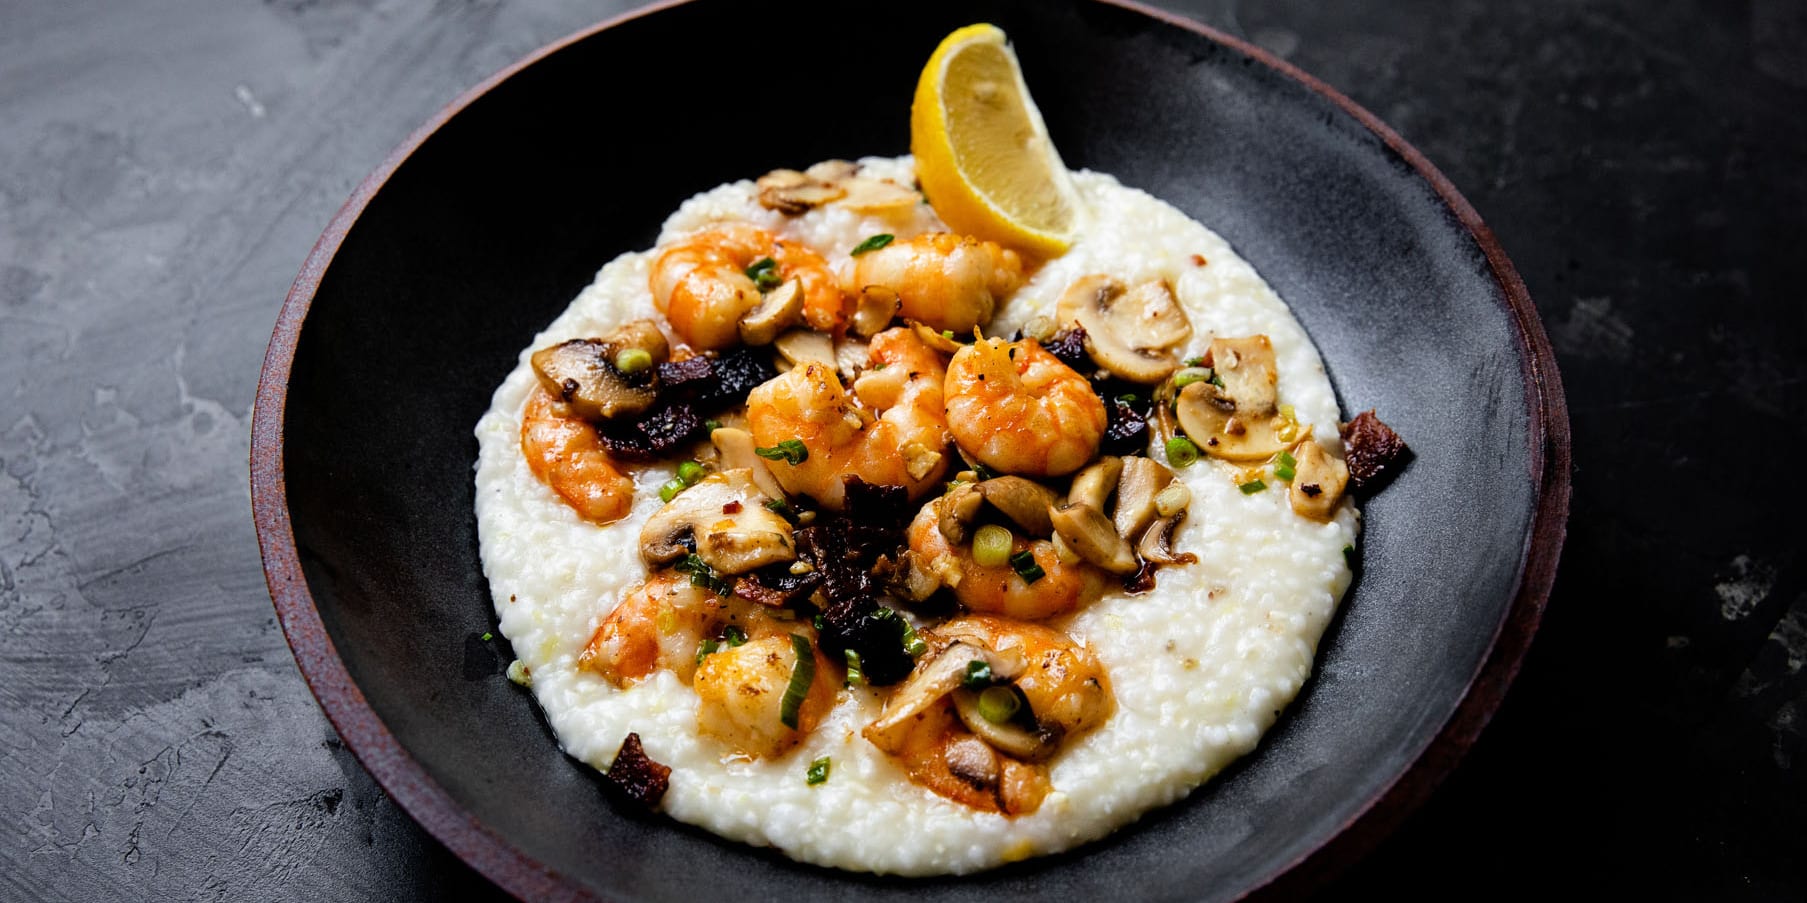 Shrimp and grits recipe FEATURED NEW